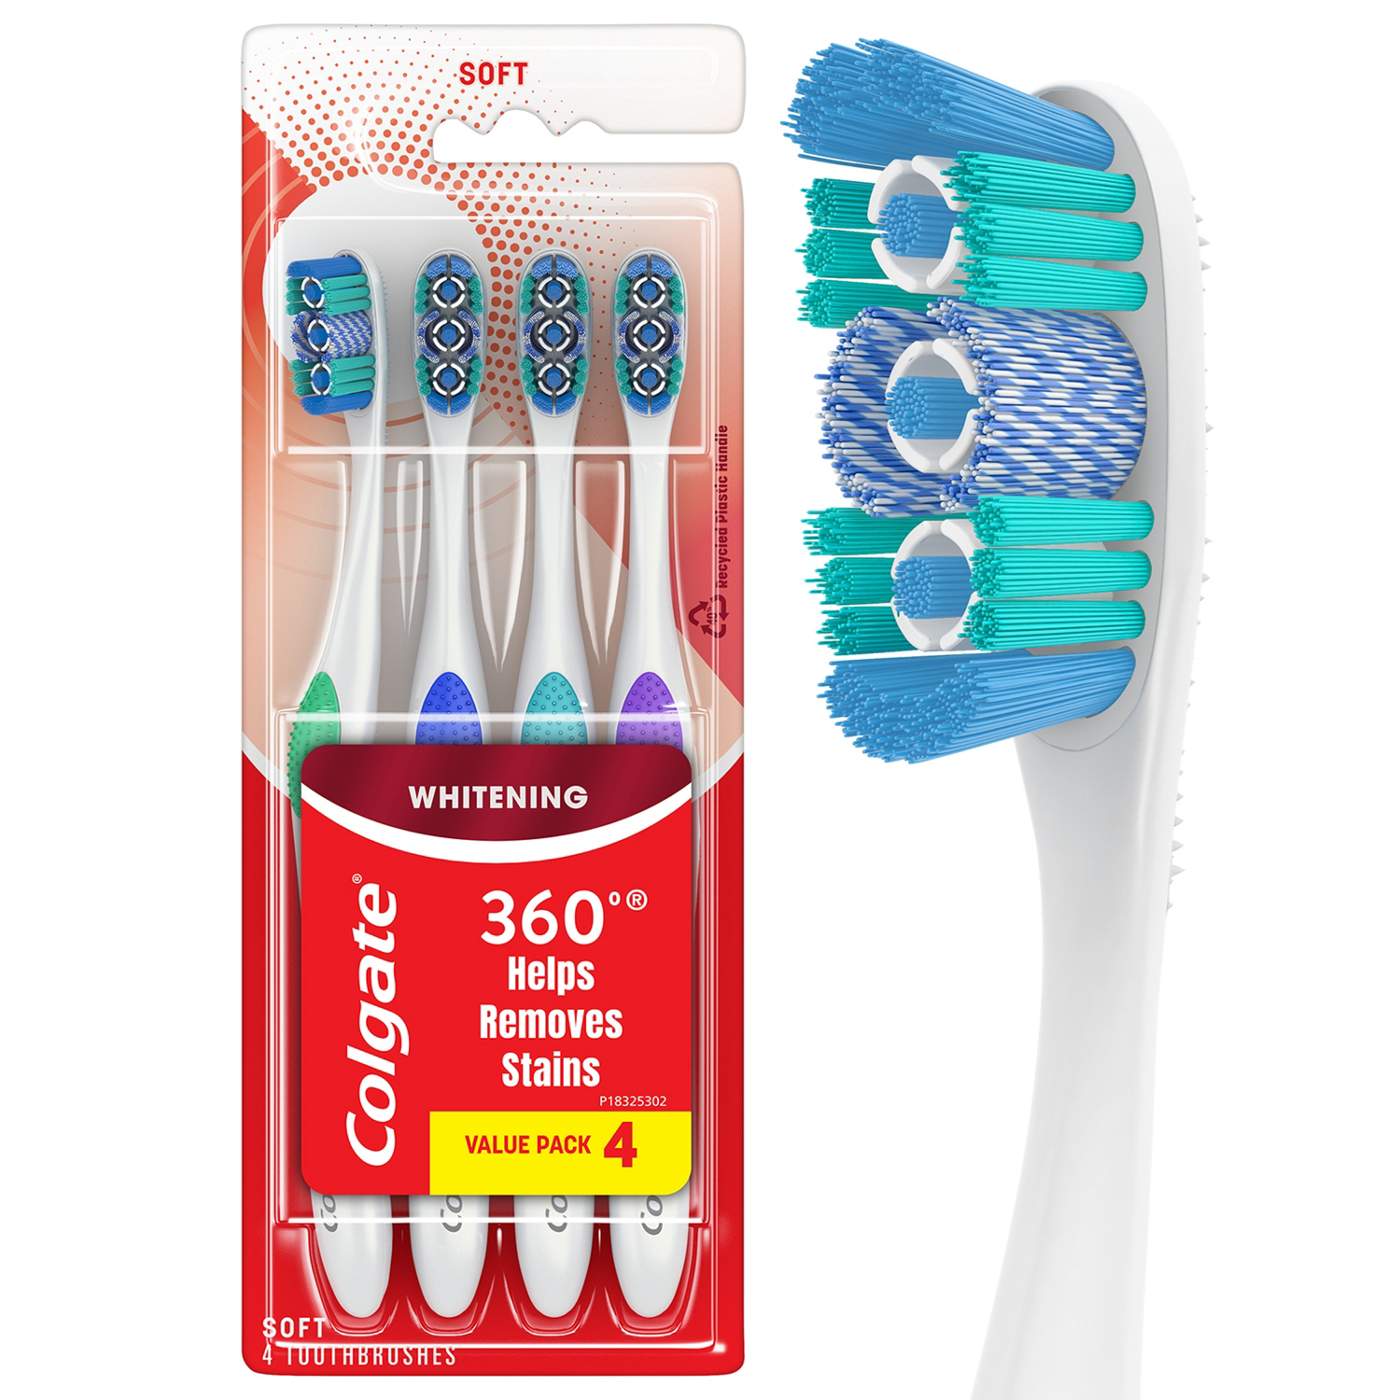 Colgate 360 Optic White Toothbrushes - Soft; image 8 of 9